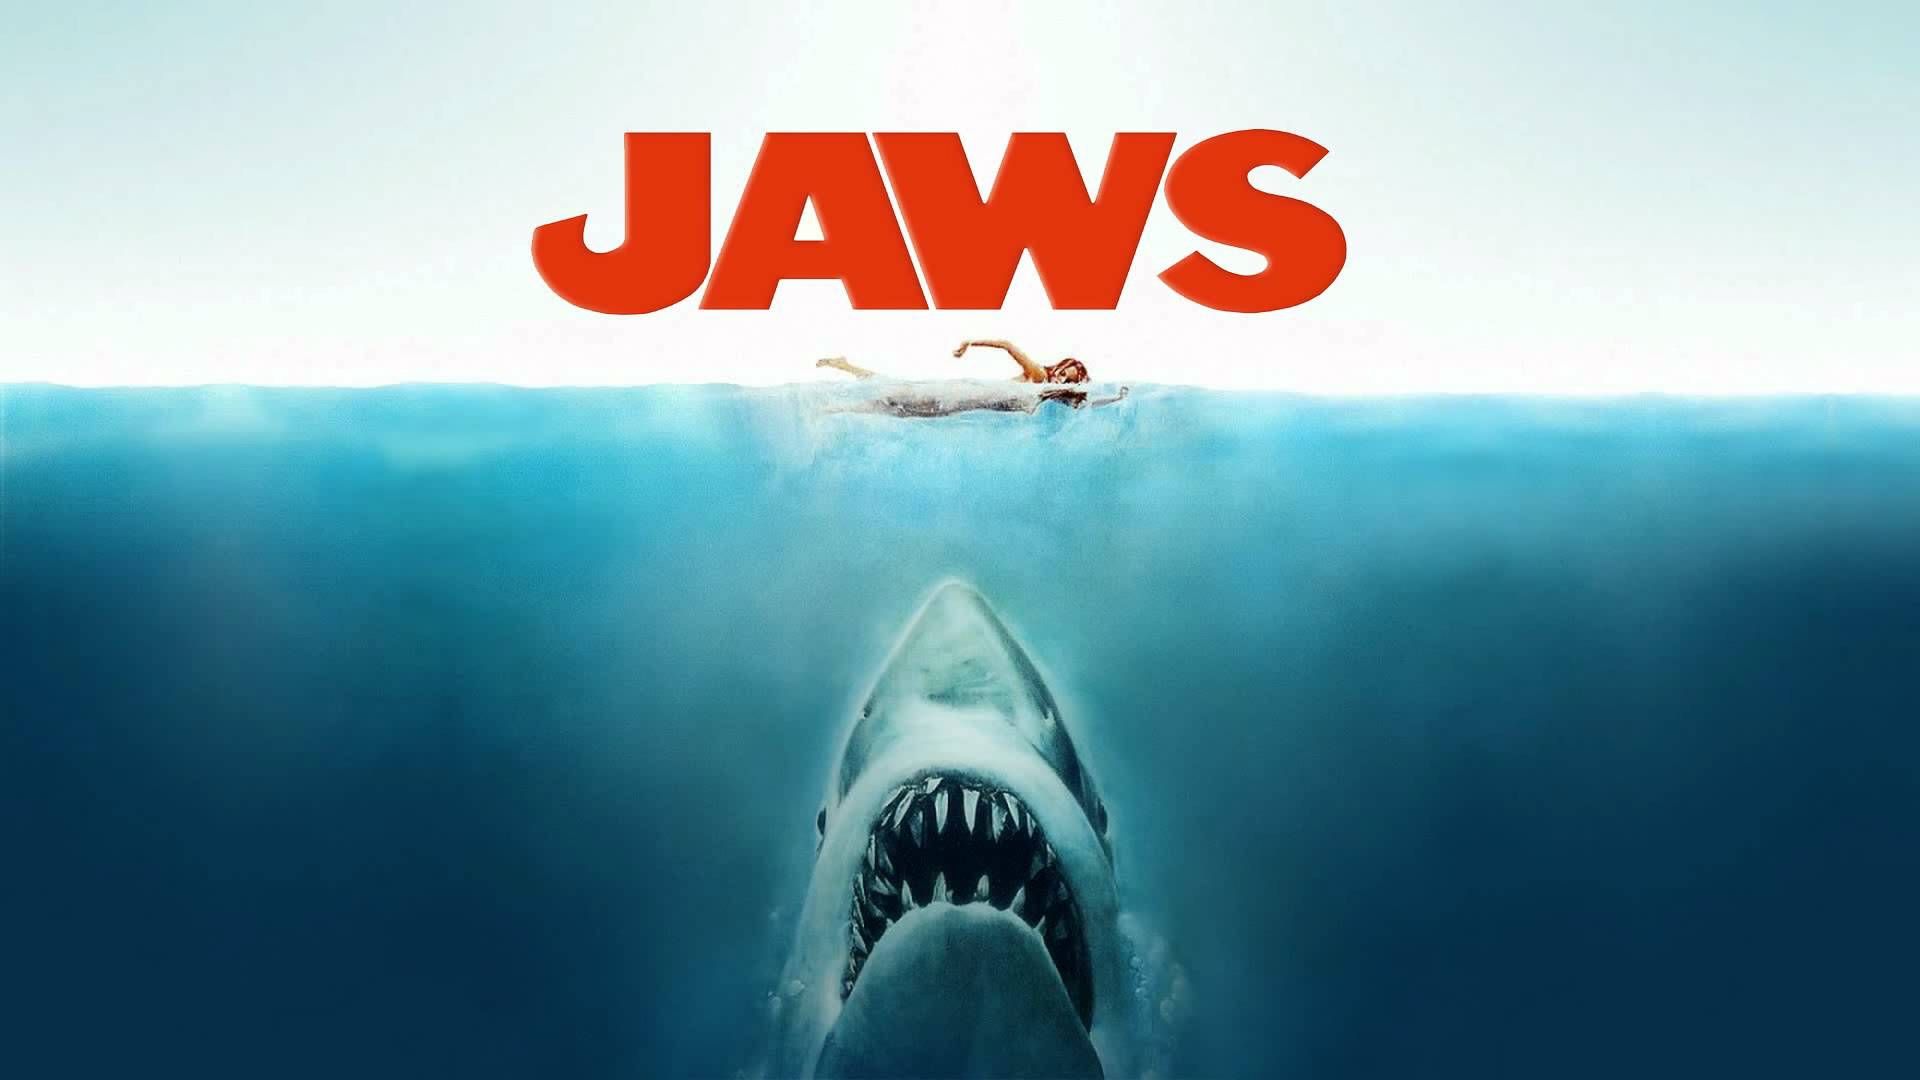 07_03_jaws_01